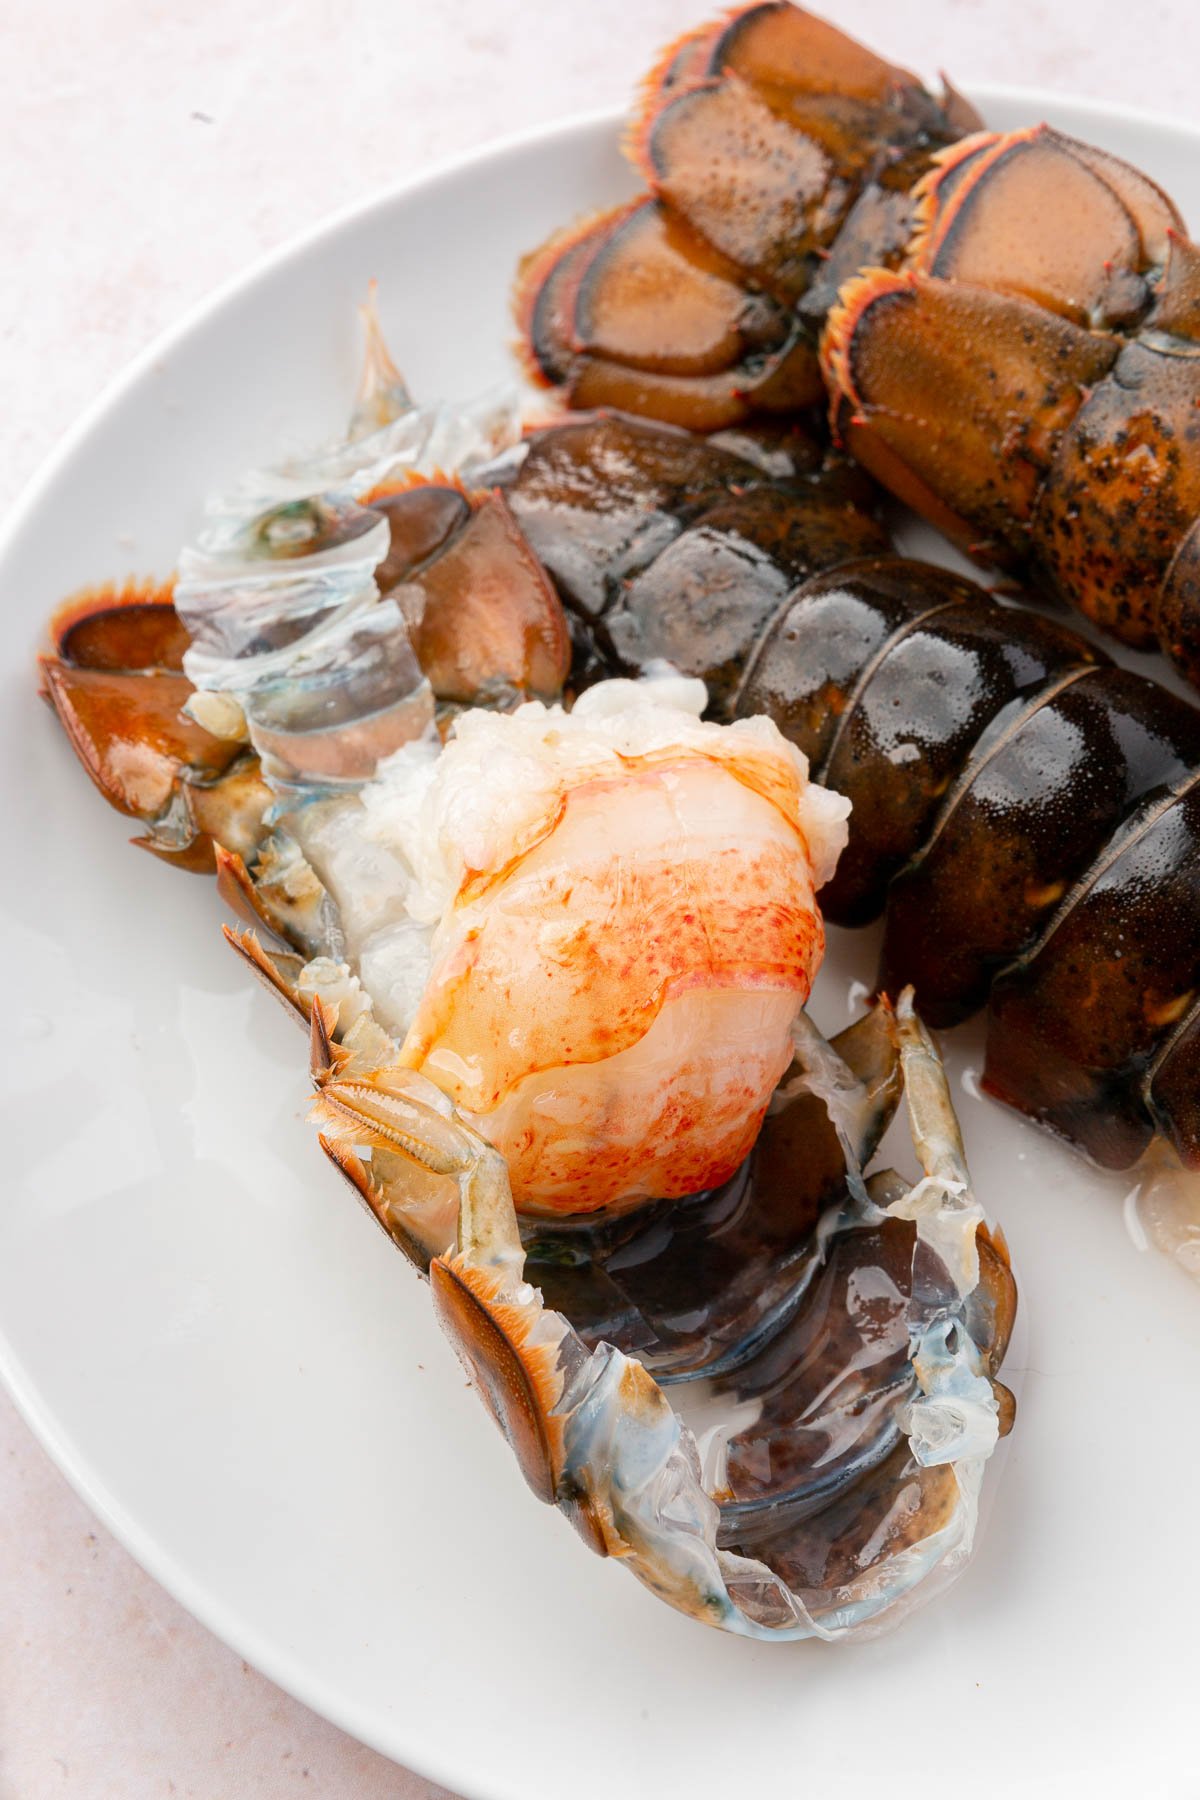 The meat of the lobster tail is partially pulled up from the shell showing the process of removing the meat from the shell before cooking.